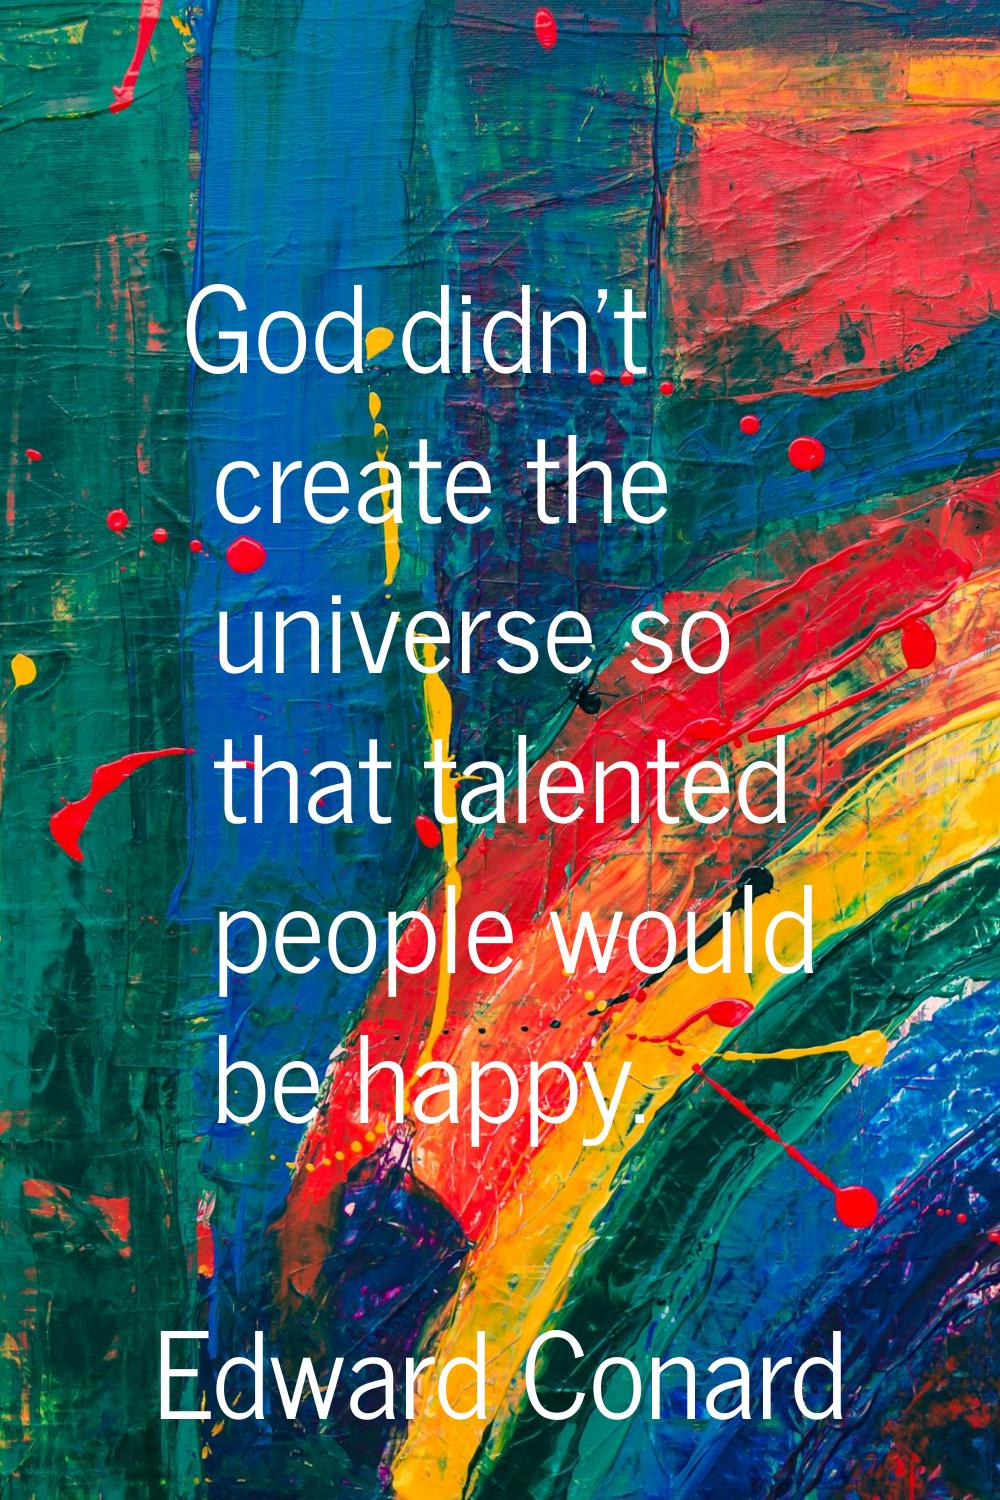 God didn't create the universe so that talented people would be happy.